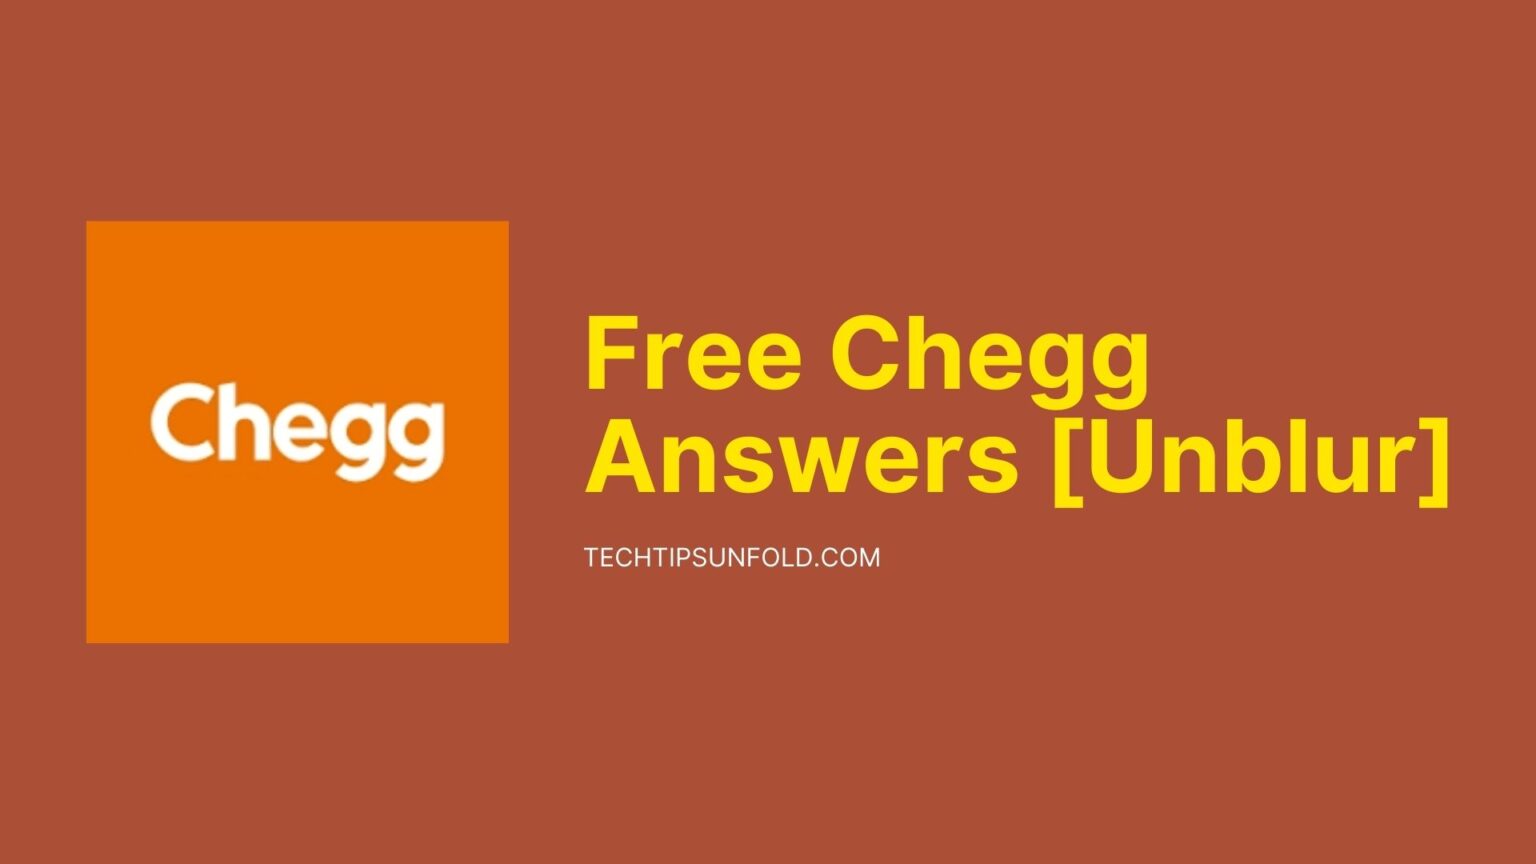 How to Unblur Chegg Answers for Free?